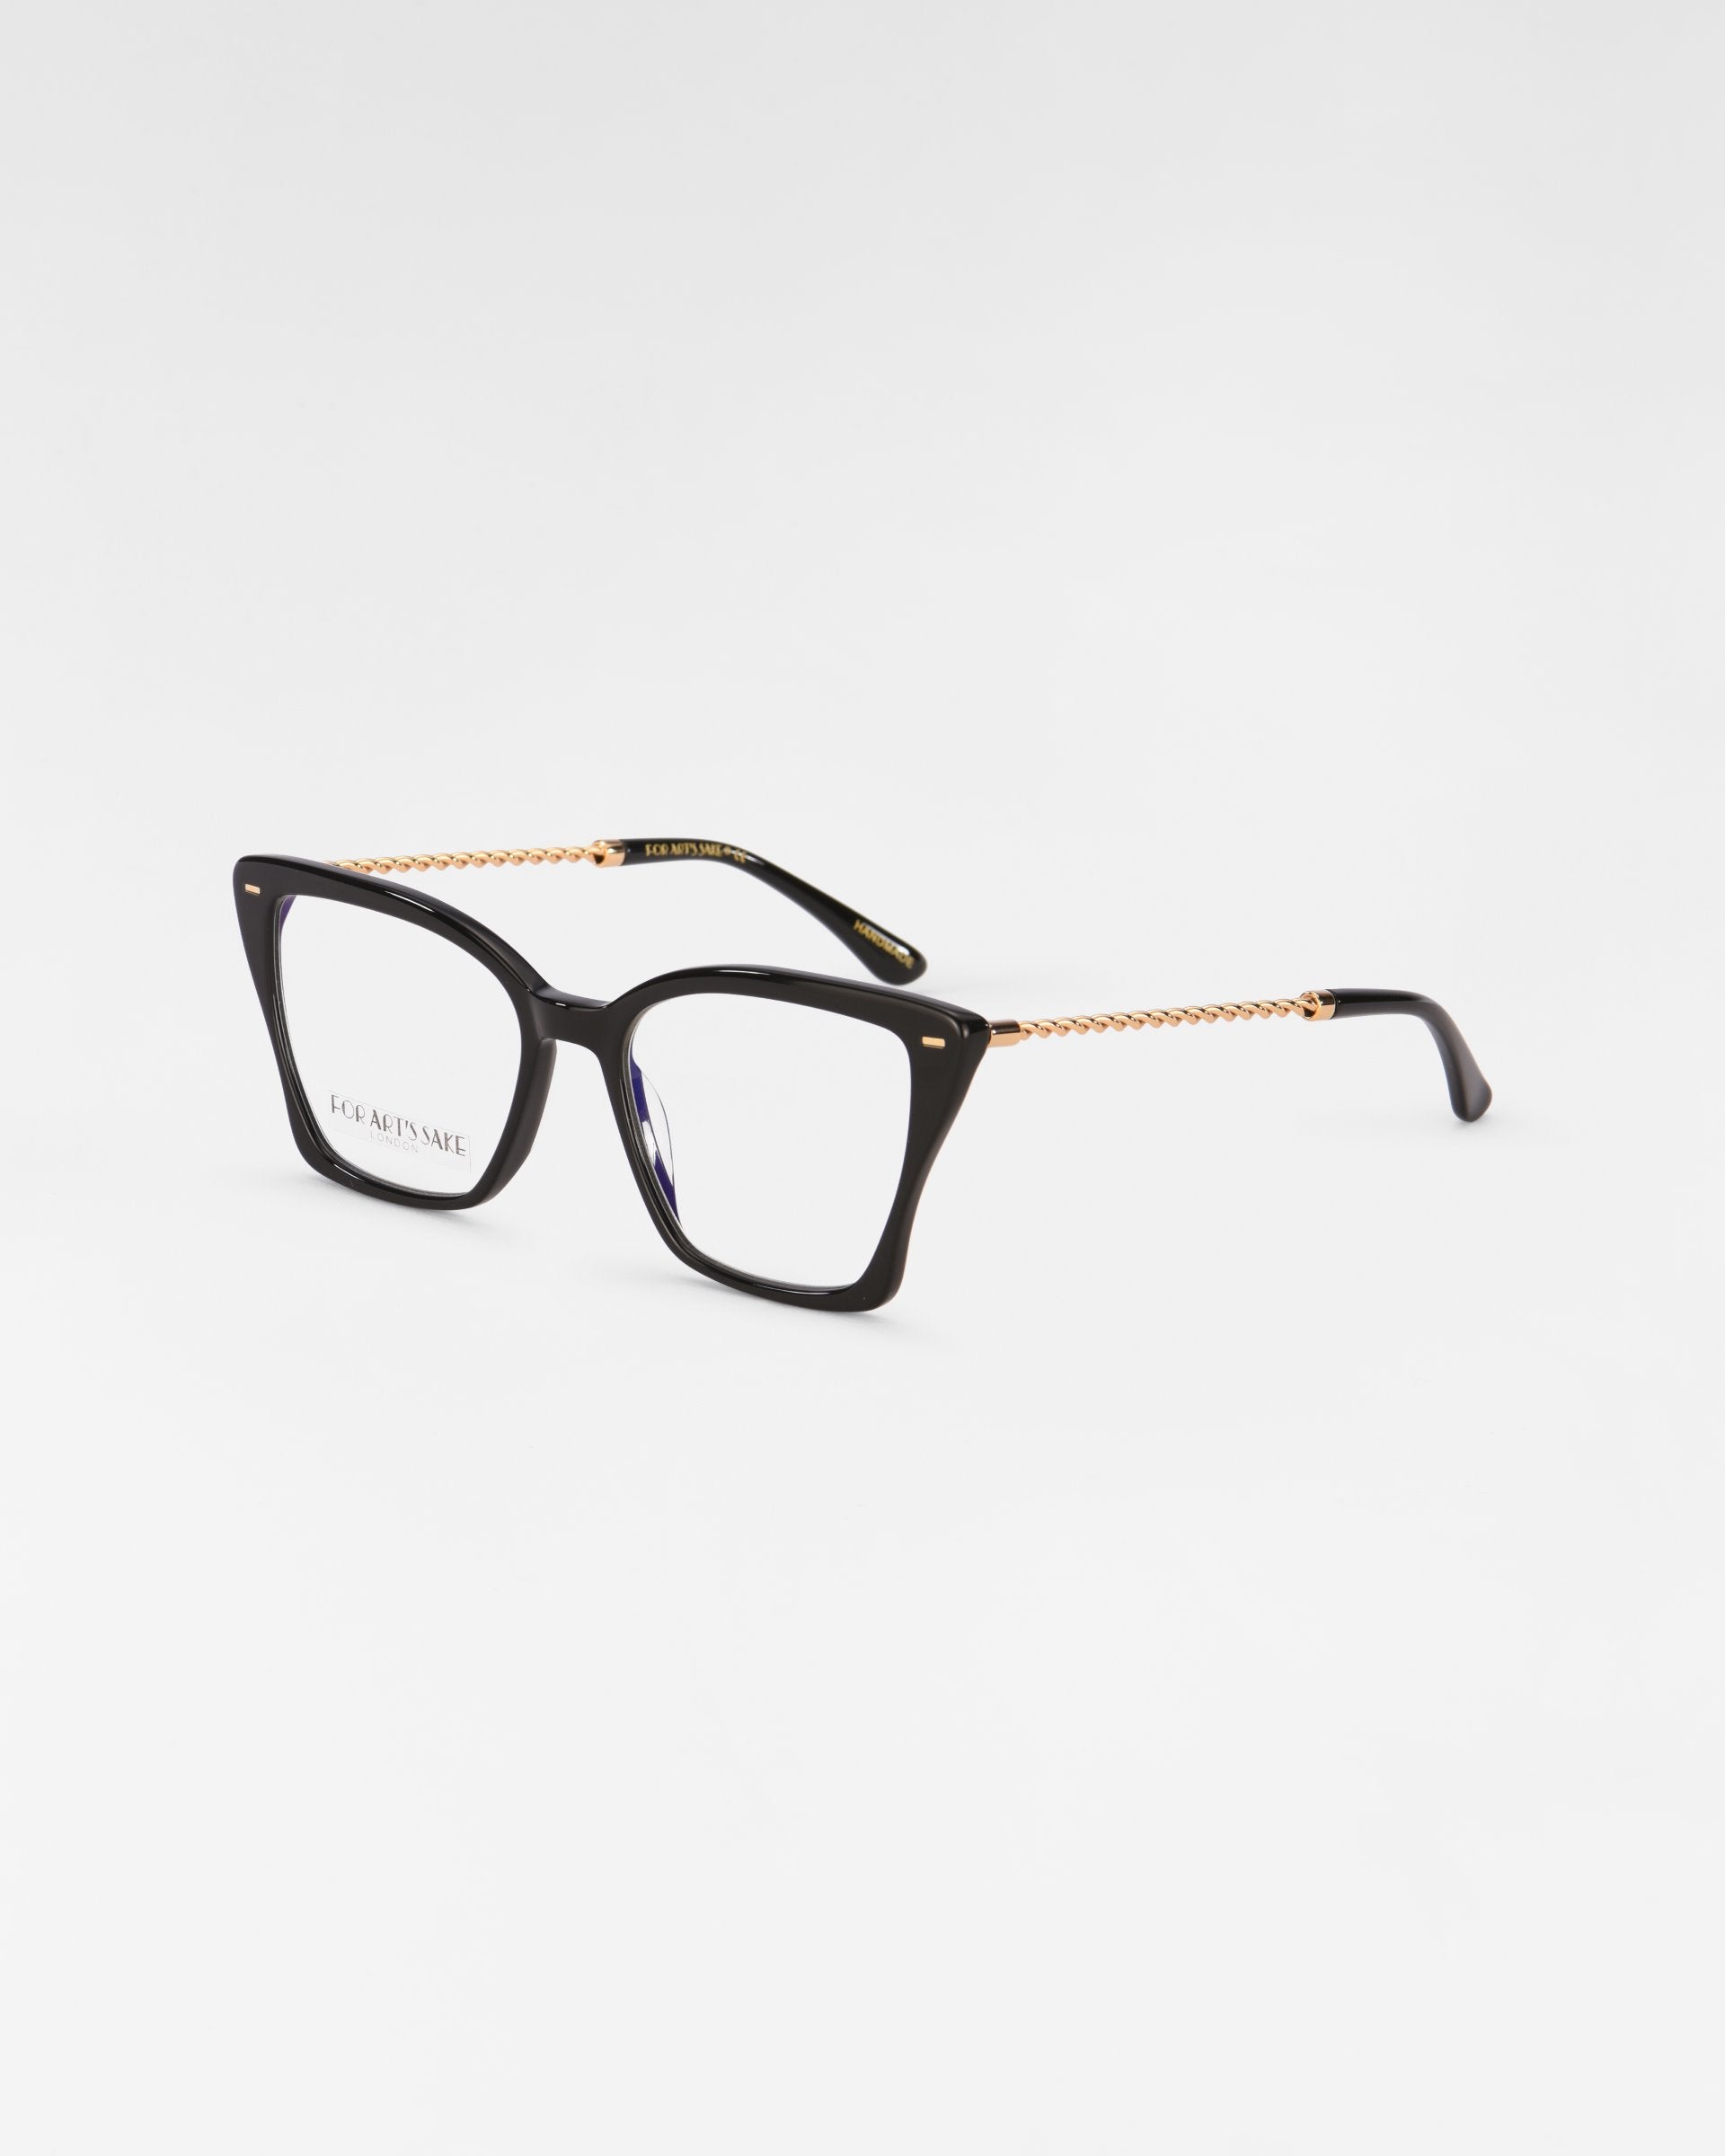 A pair of rectangular Dion eyeglasses with tortoiseshell frames and gold-accented temples featuring intricate chain-like detailing, equipped with a blue light filter, showcased on a plain white background by For Art's Sake®.